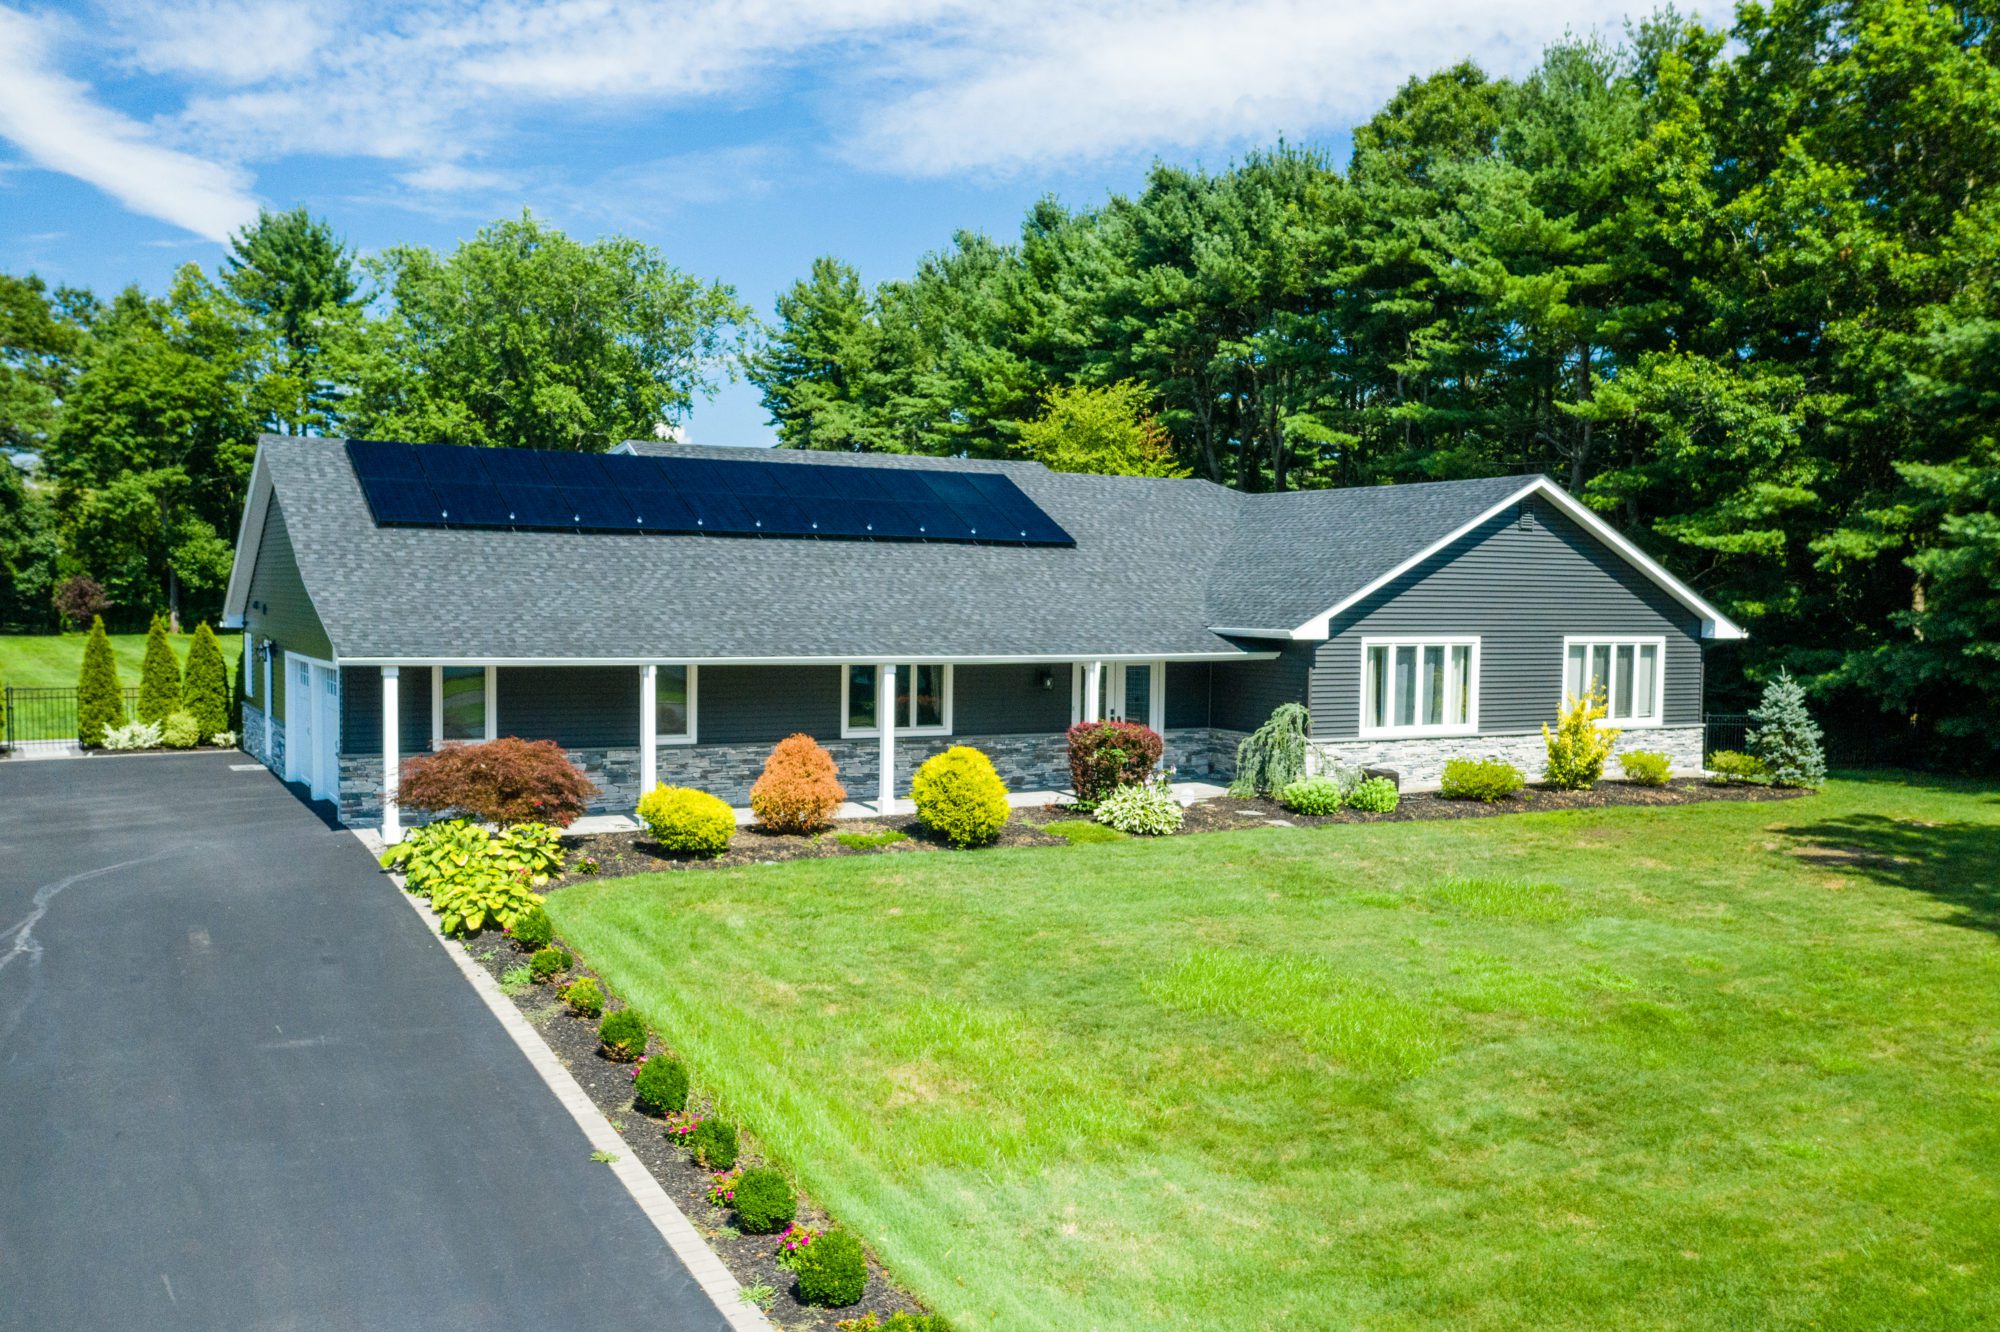 Many homeowners are asking themselves "should I go solar?" in order to save money on electricity bills all year.